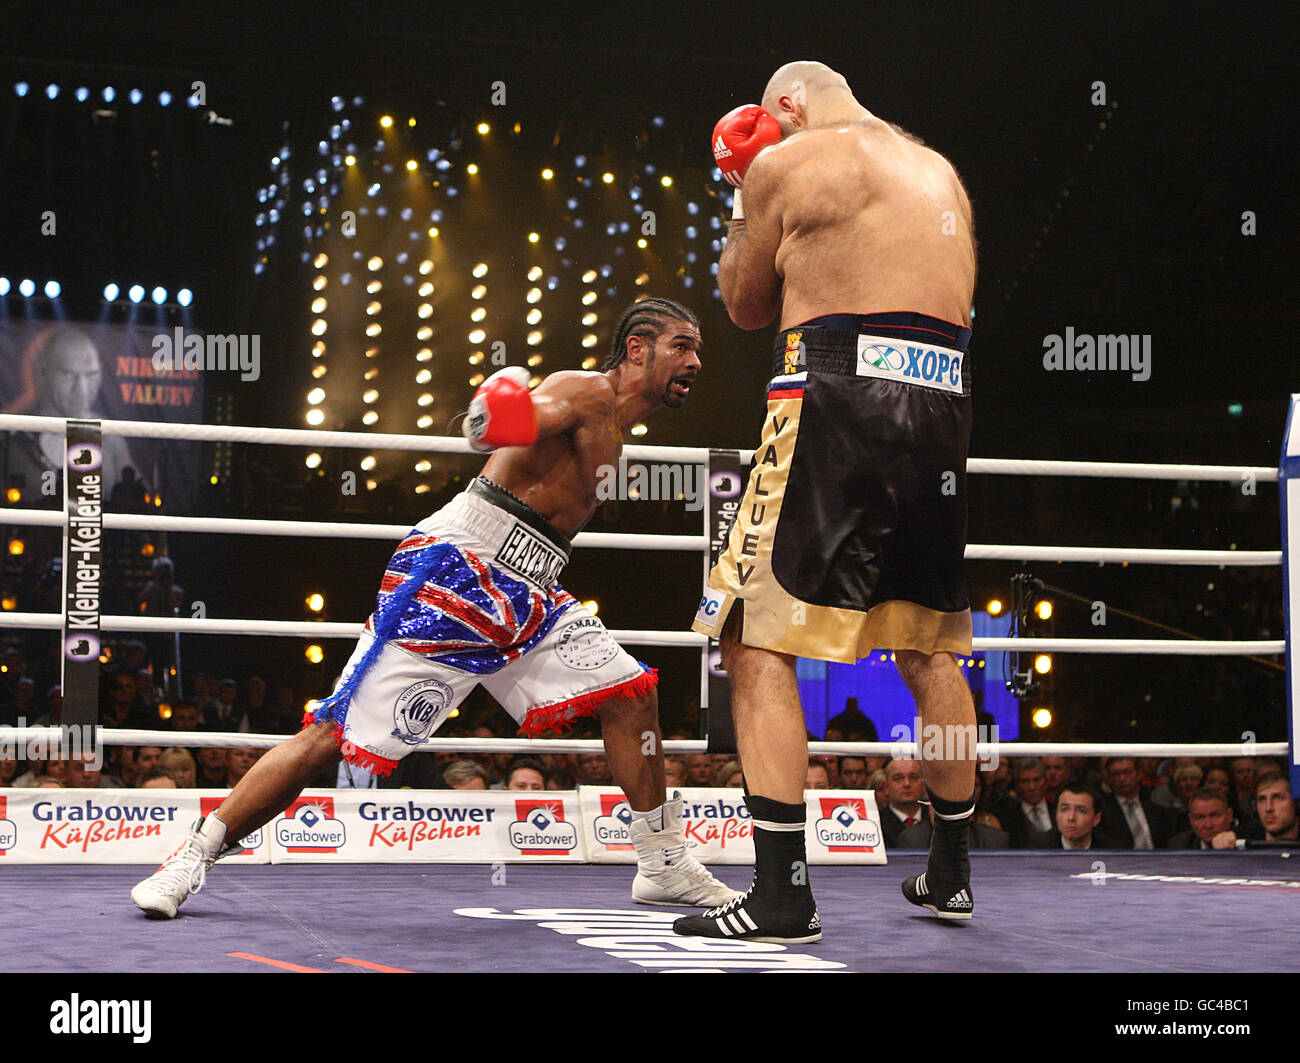 England's David Haye (left) on the attack against Russia's Nikolai Valuev during the WBA World Heavyweight title fight at the Nuremberg Arena, Germany. Haye was to win the fight on points. Stock Photo